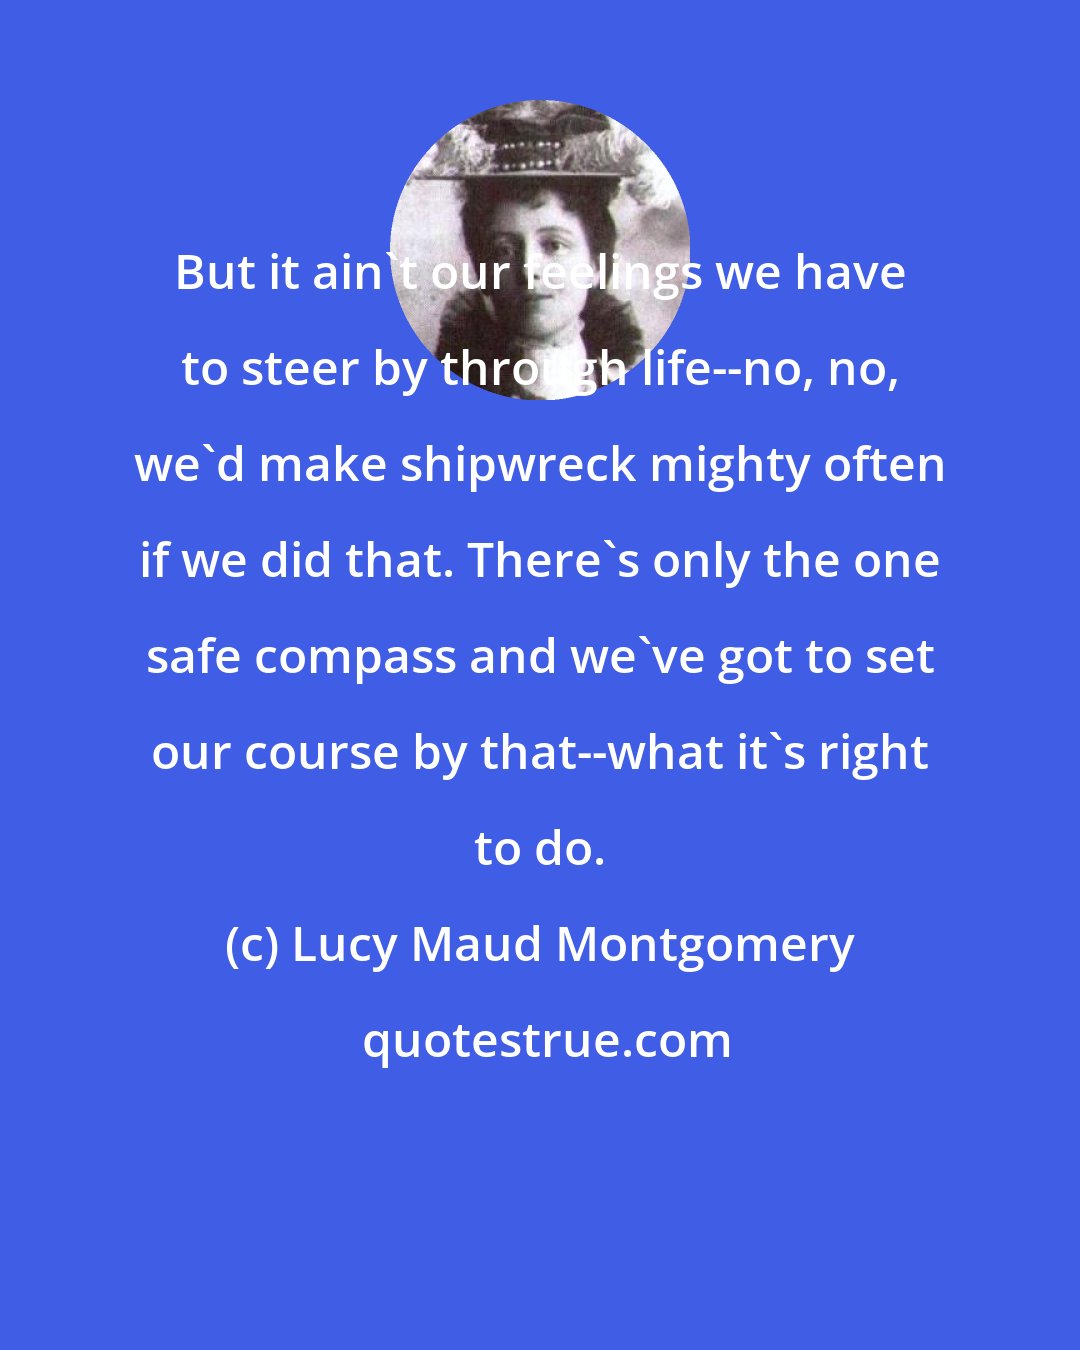 Lucy Maud Montgomery: But it ain't our feelings we have to steer by through life--no, no, we'd make shipwreck mighty often if we did that. There's only the one safe compass and we've got to set our course by that--what it's right to do.